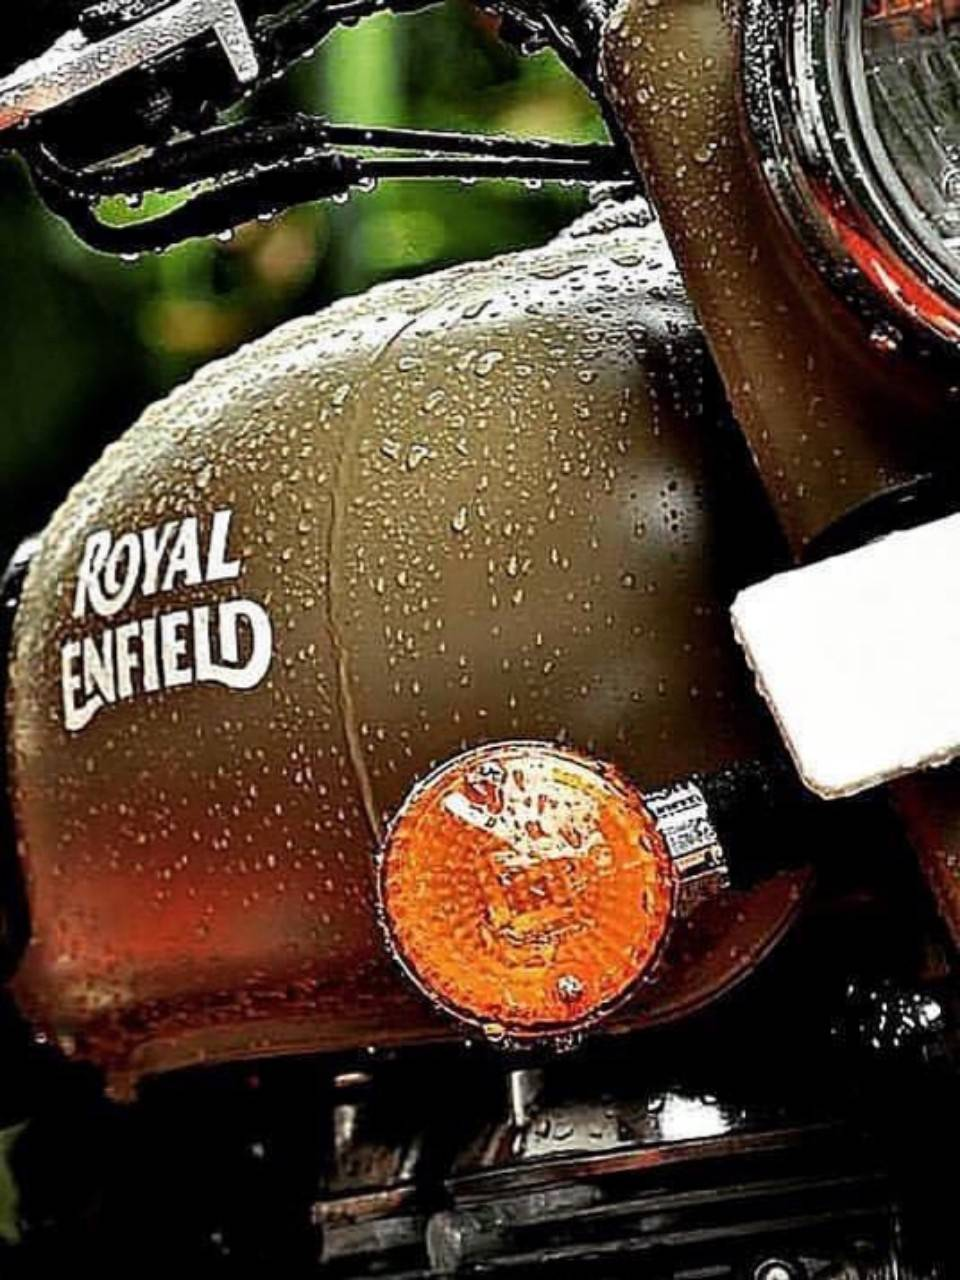 Royal Enfield Mobile Full HD Wallpapers - Wallpaper Cave